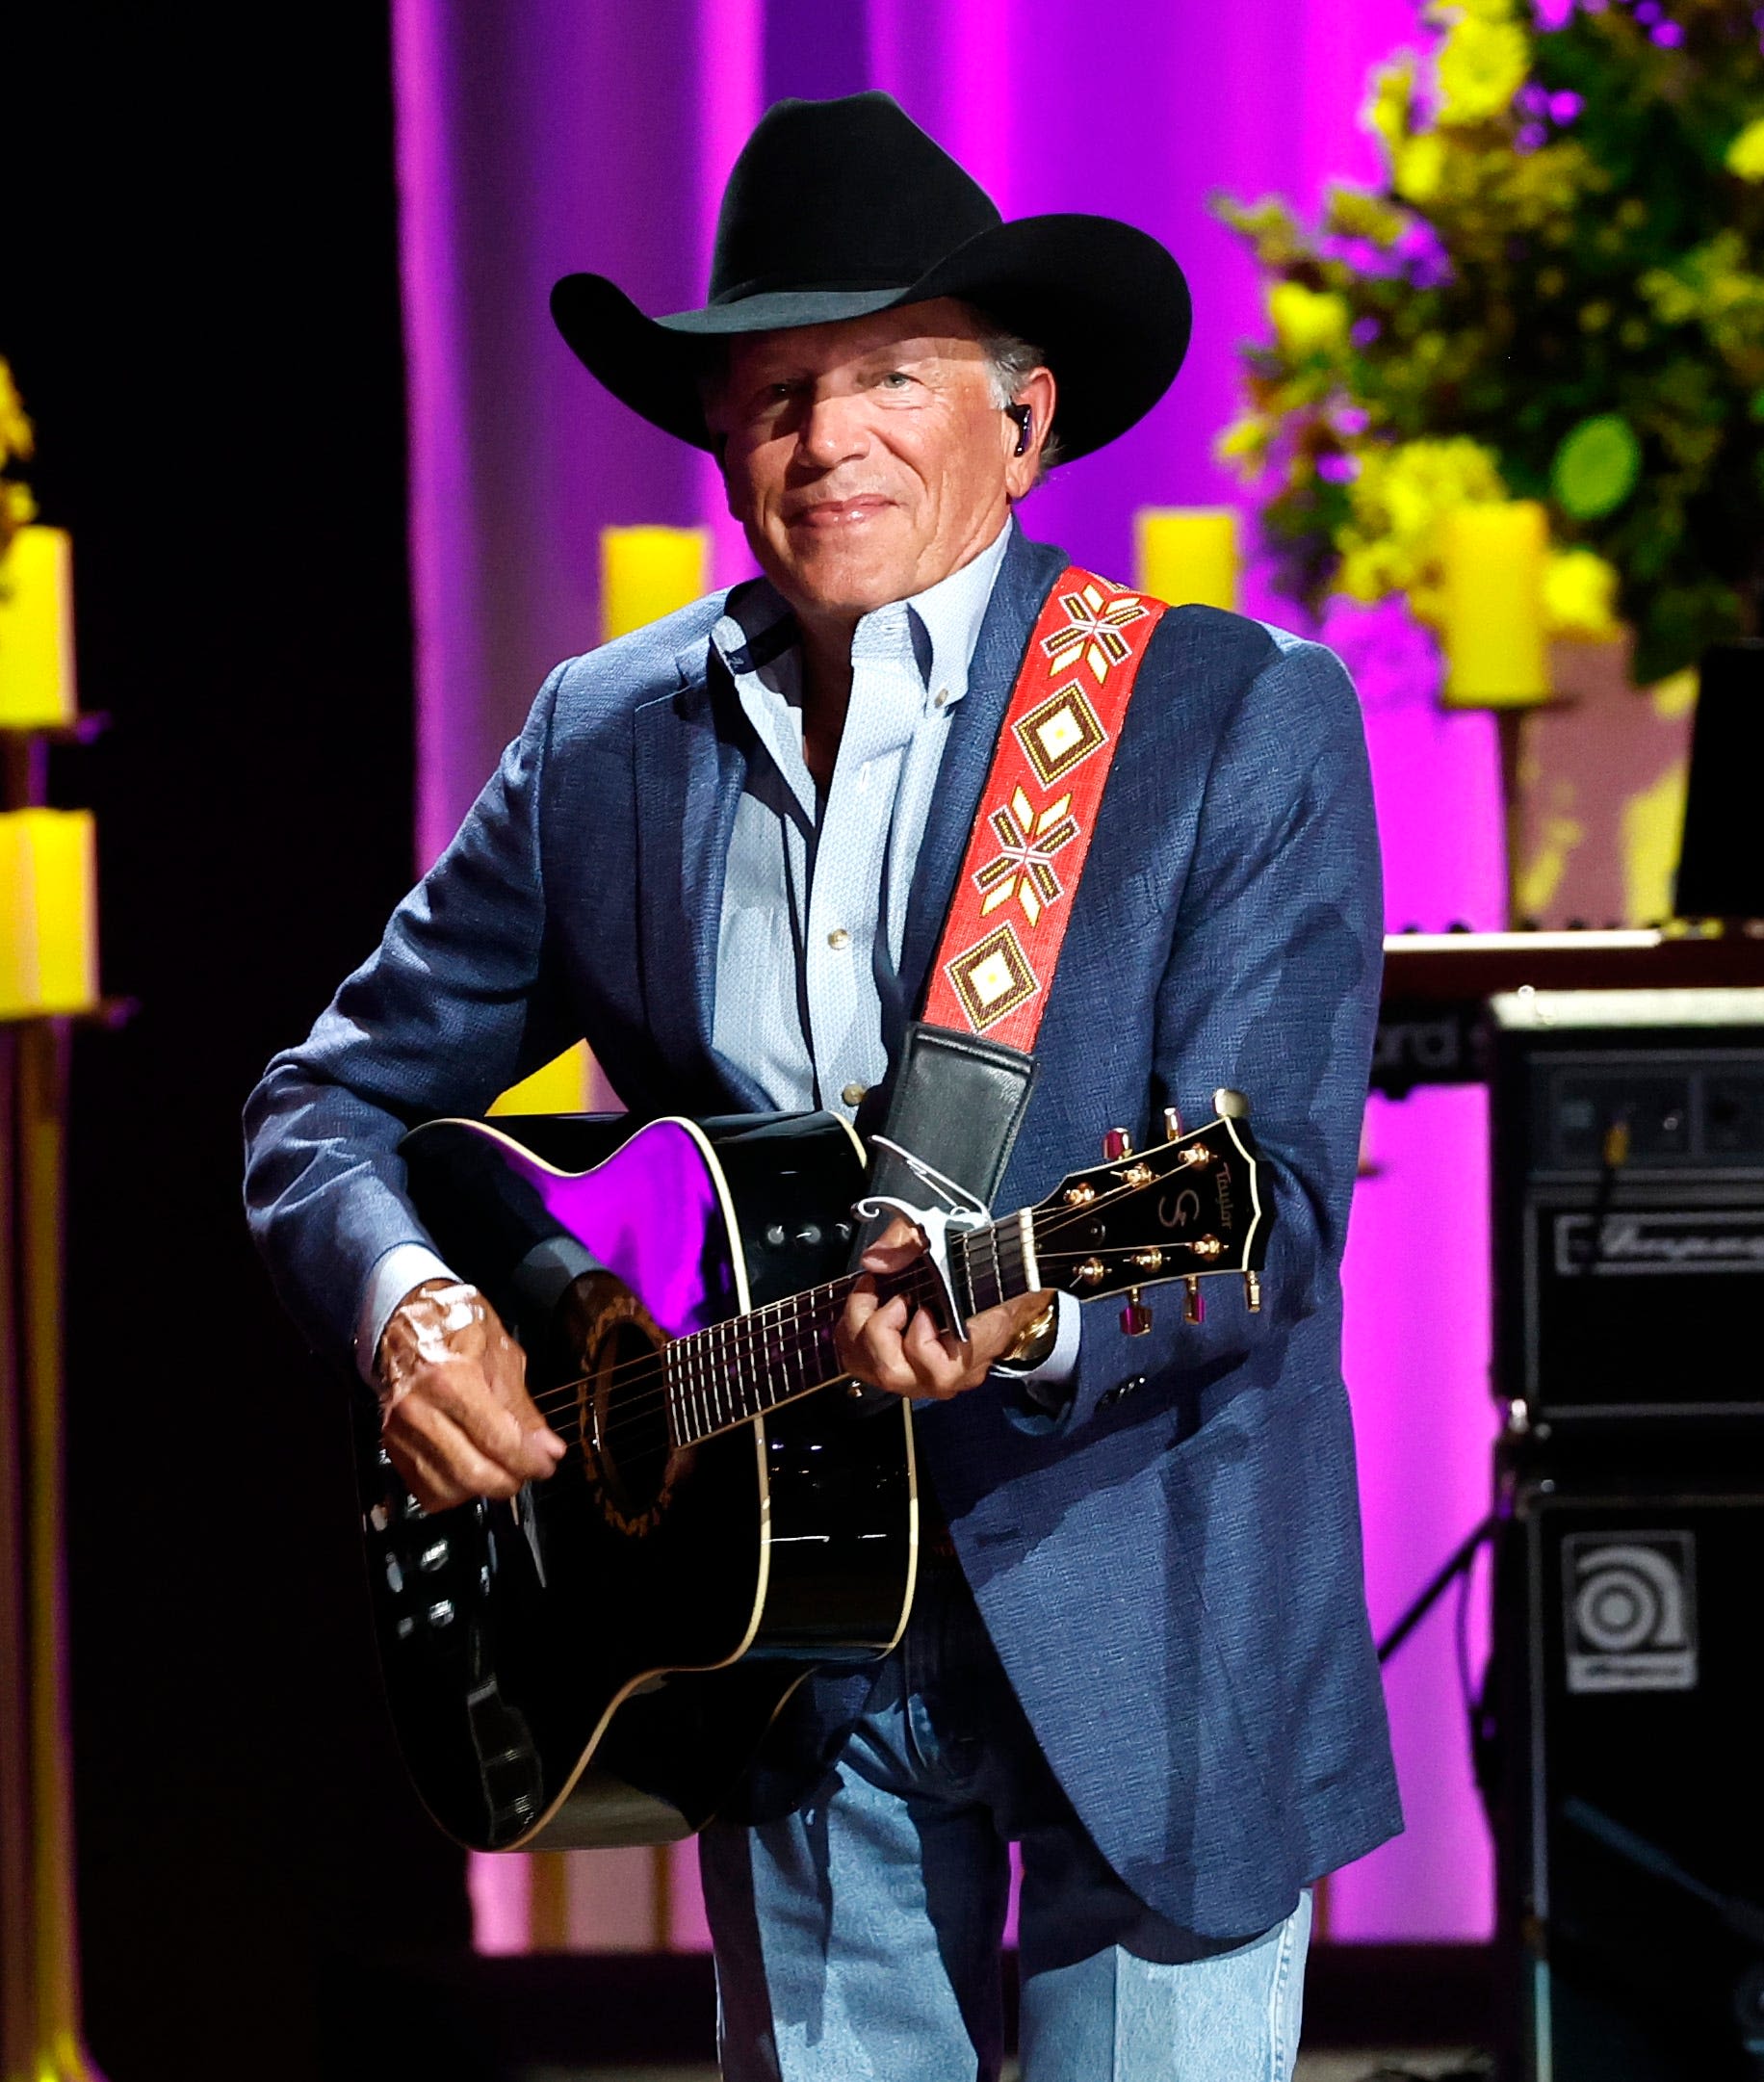 George Strait breaks record for largest ticketed concert in US with nearly 111K in attendance